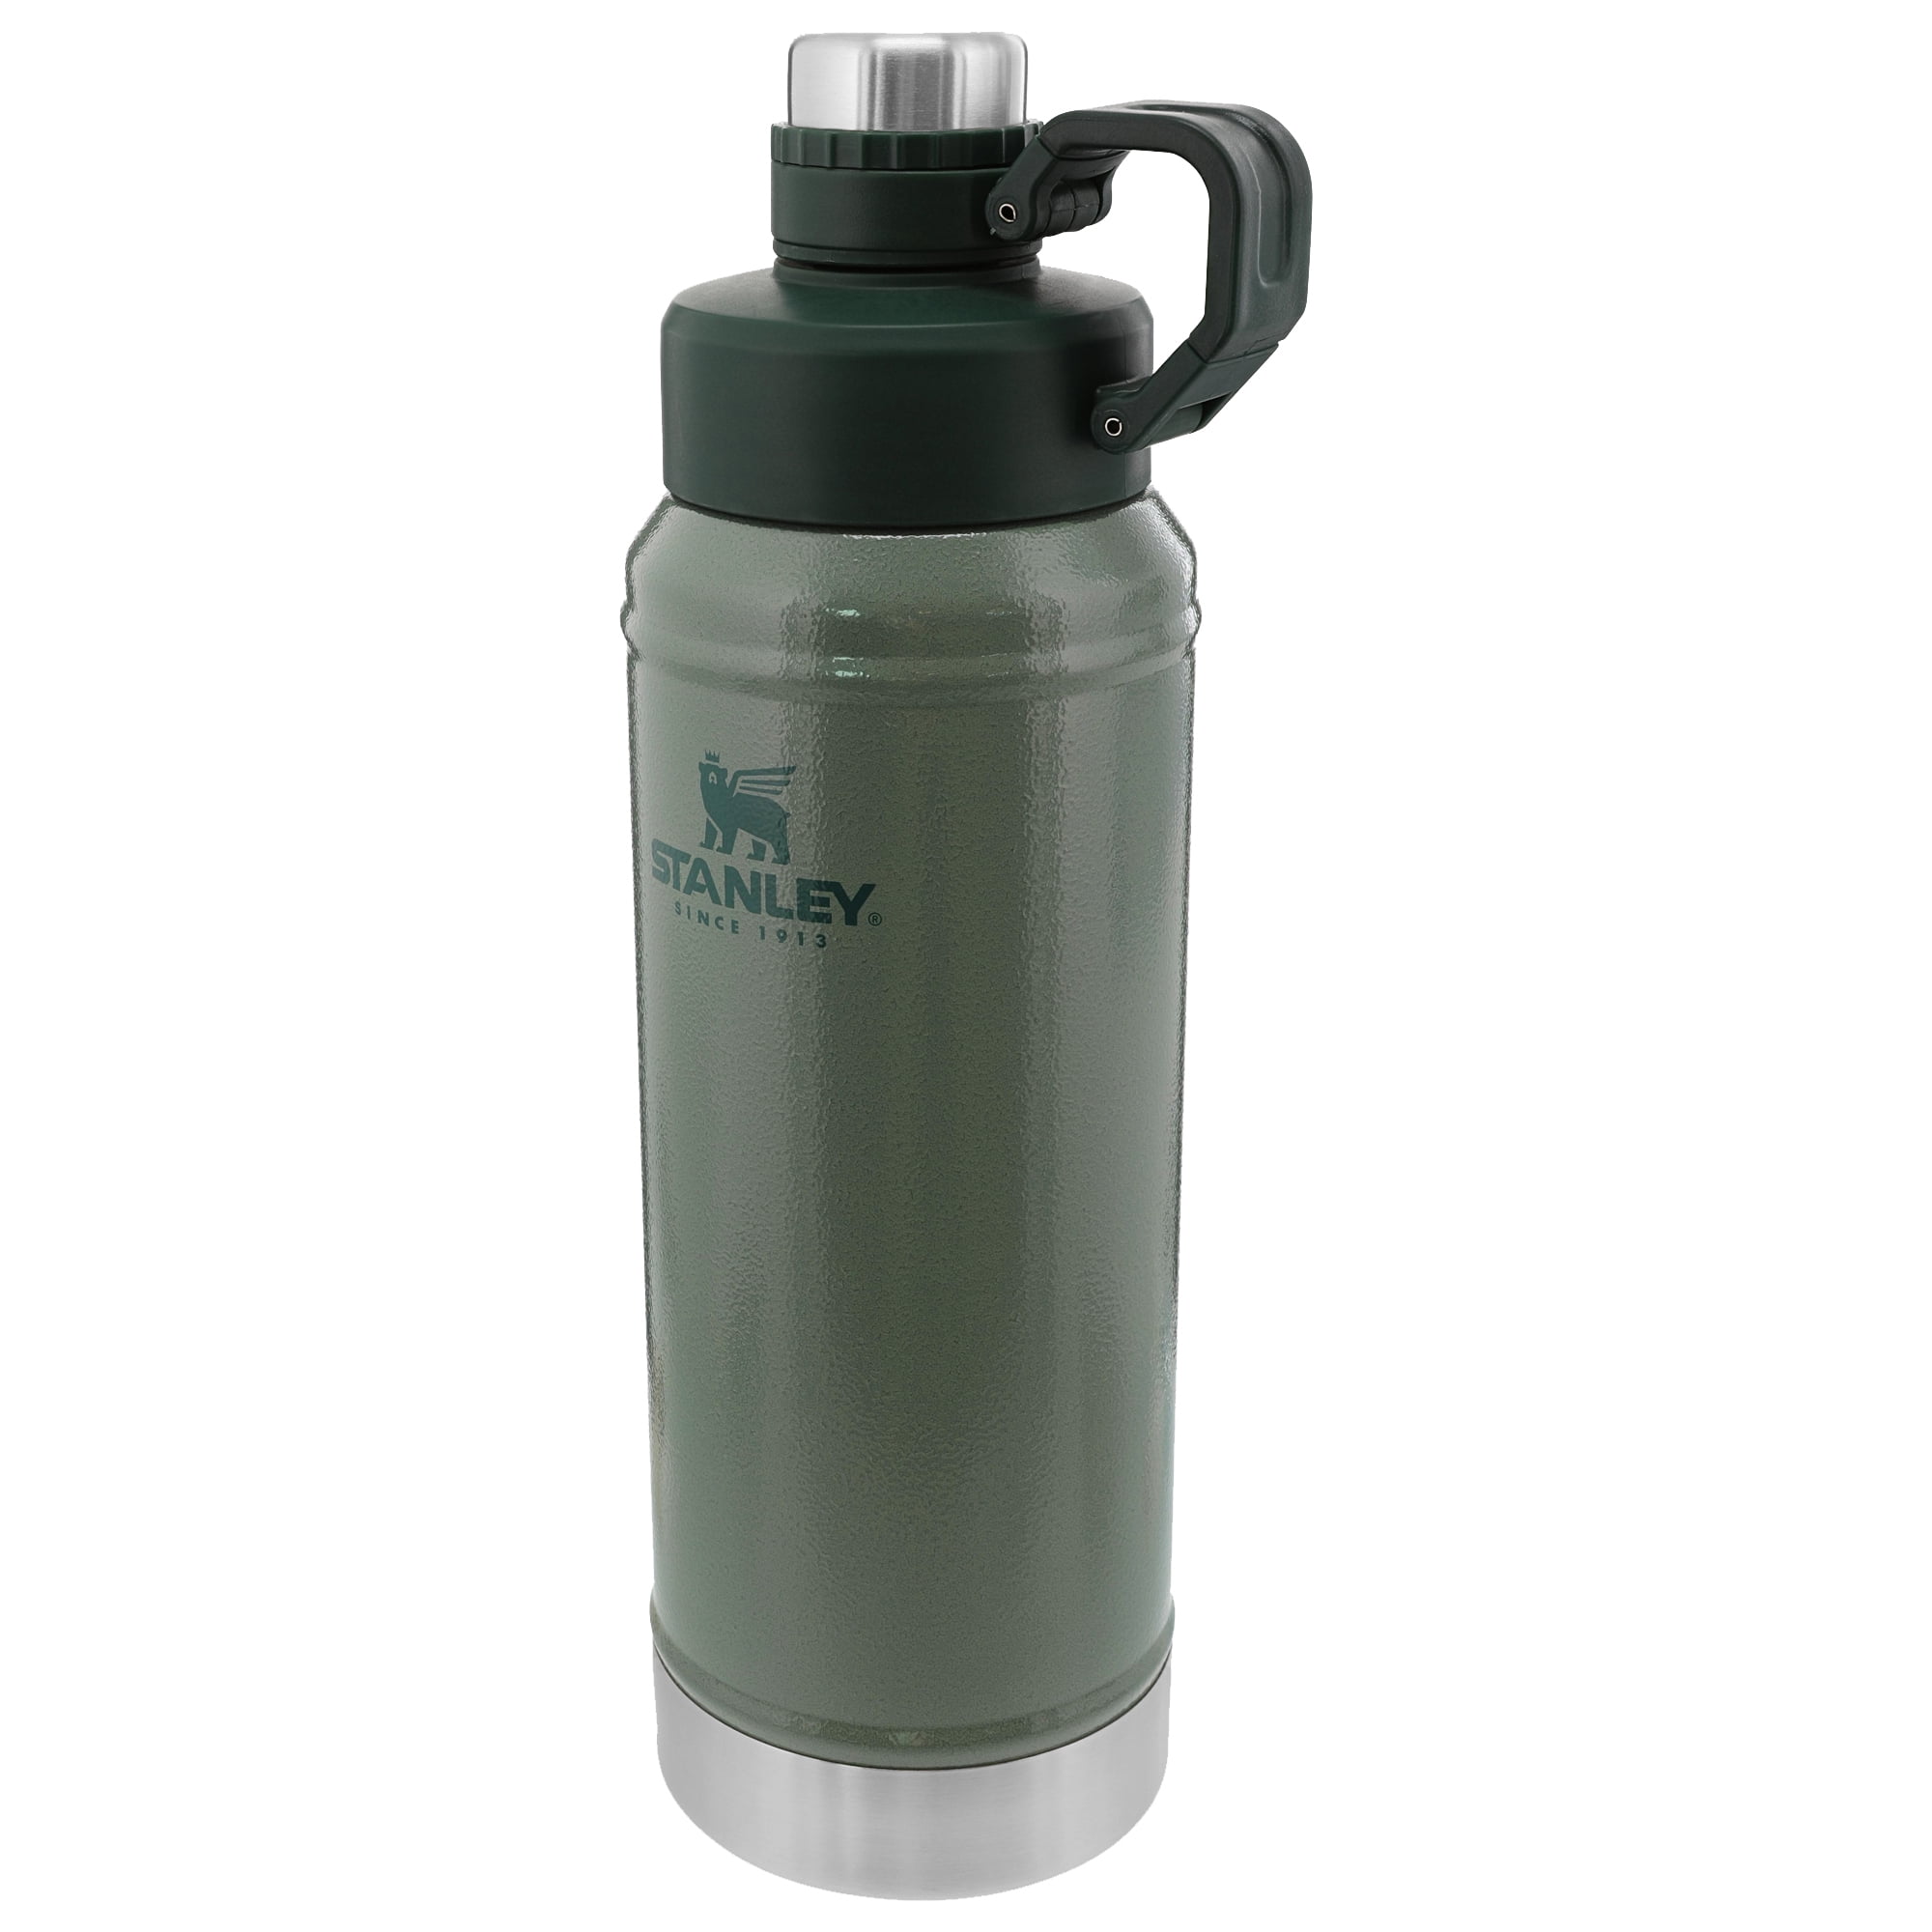 Stanley Tools Adventure Vacuum Bottle-Stainless Steel-25 oz shed10656 —  CampSaver